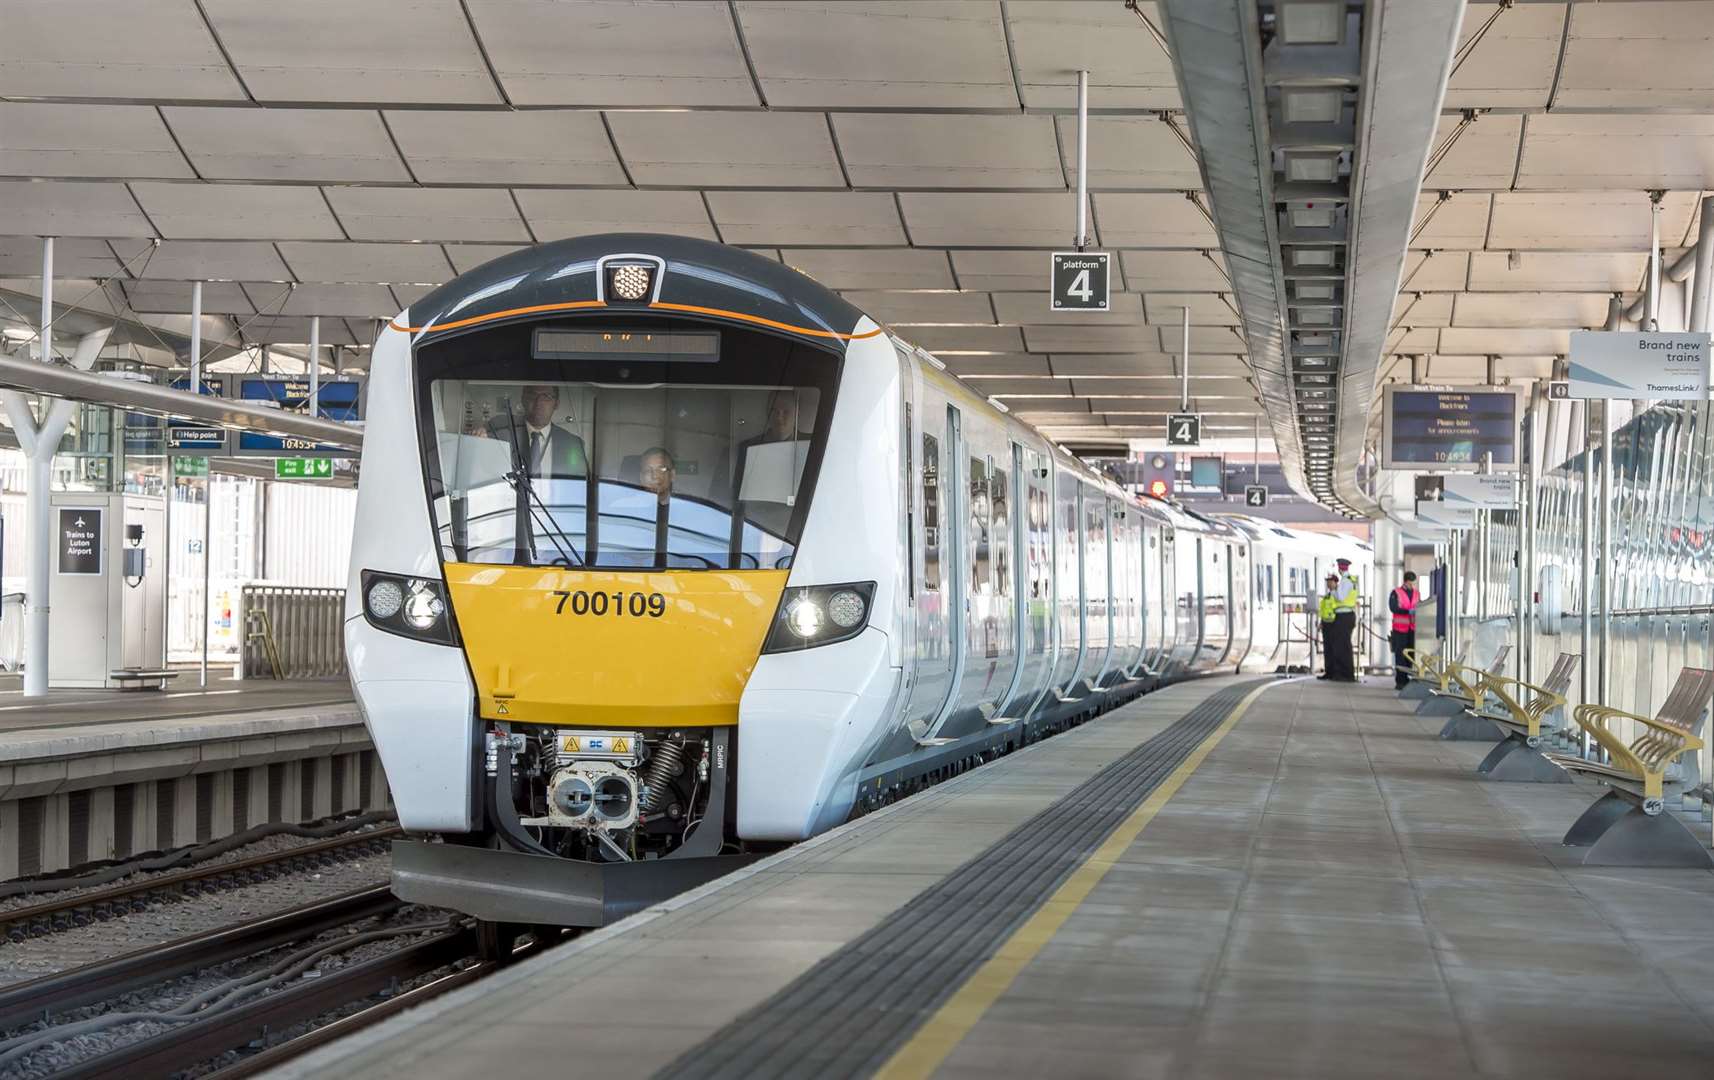 Thameslink services to Maidstone East are delayed